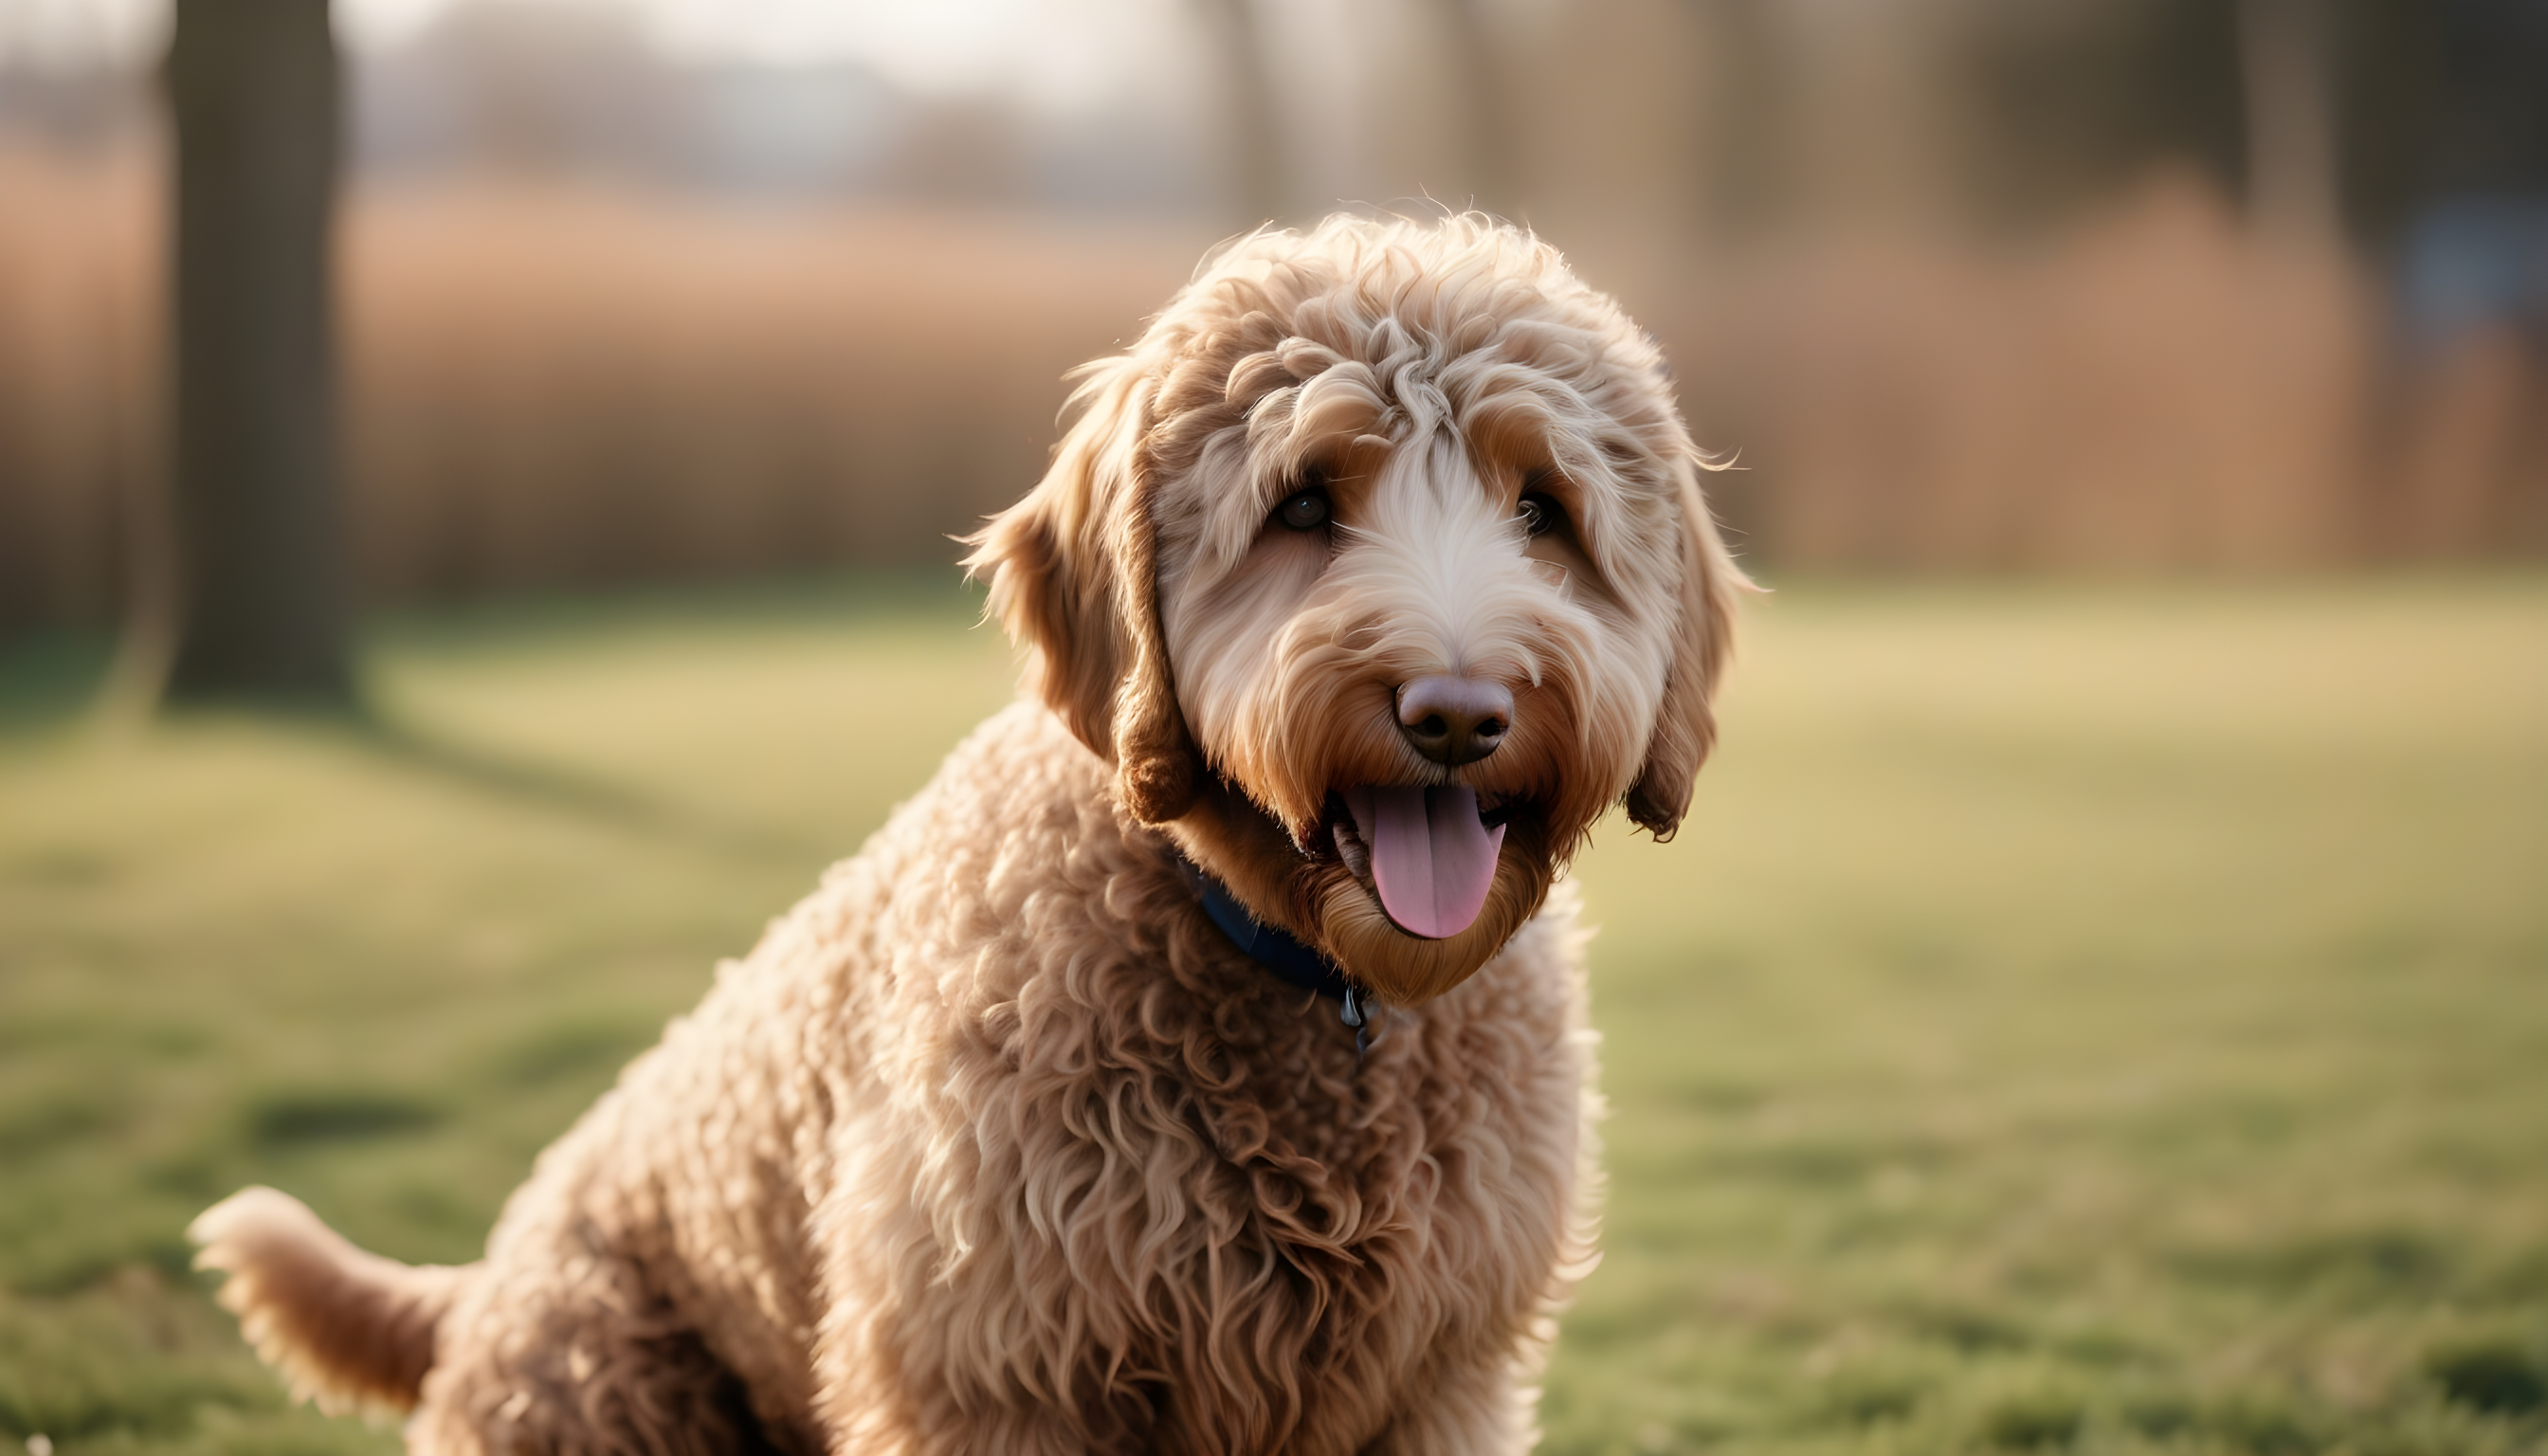 Why are Labradoodles so popular?